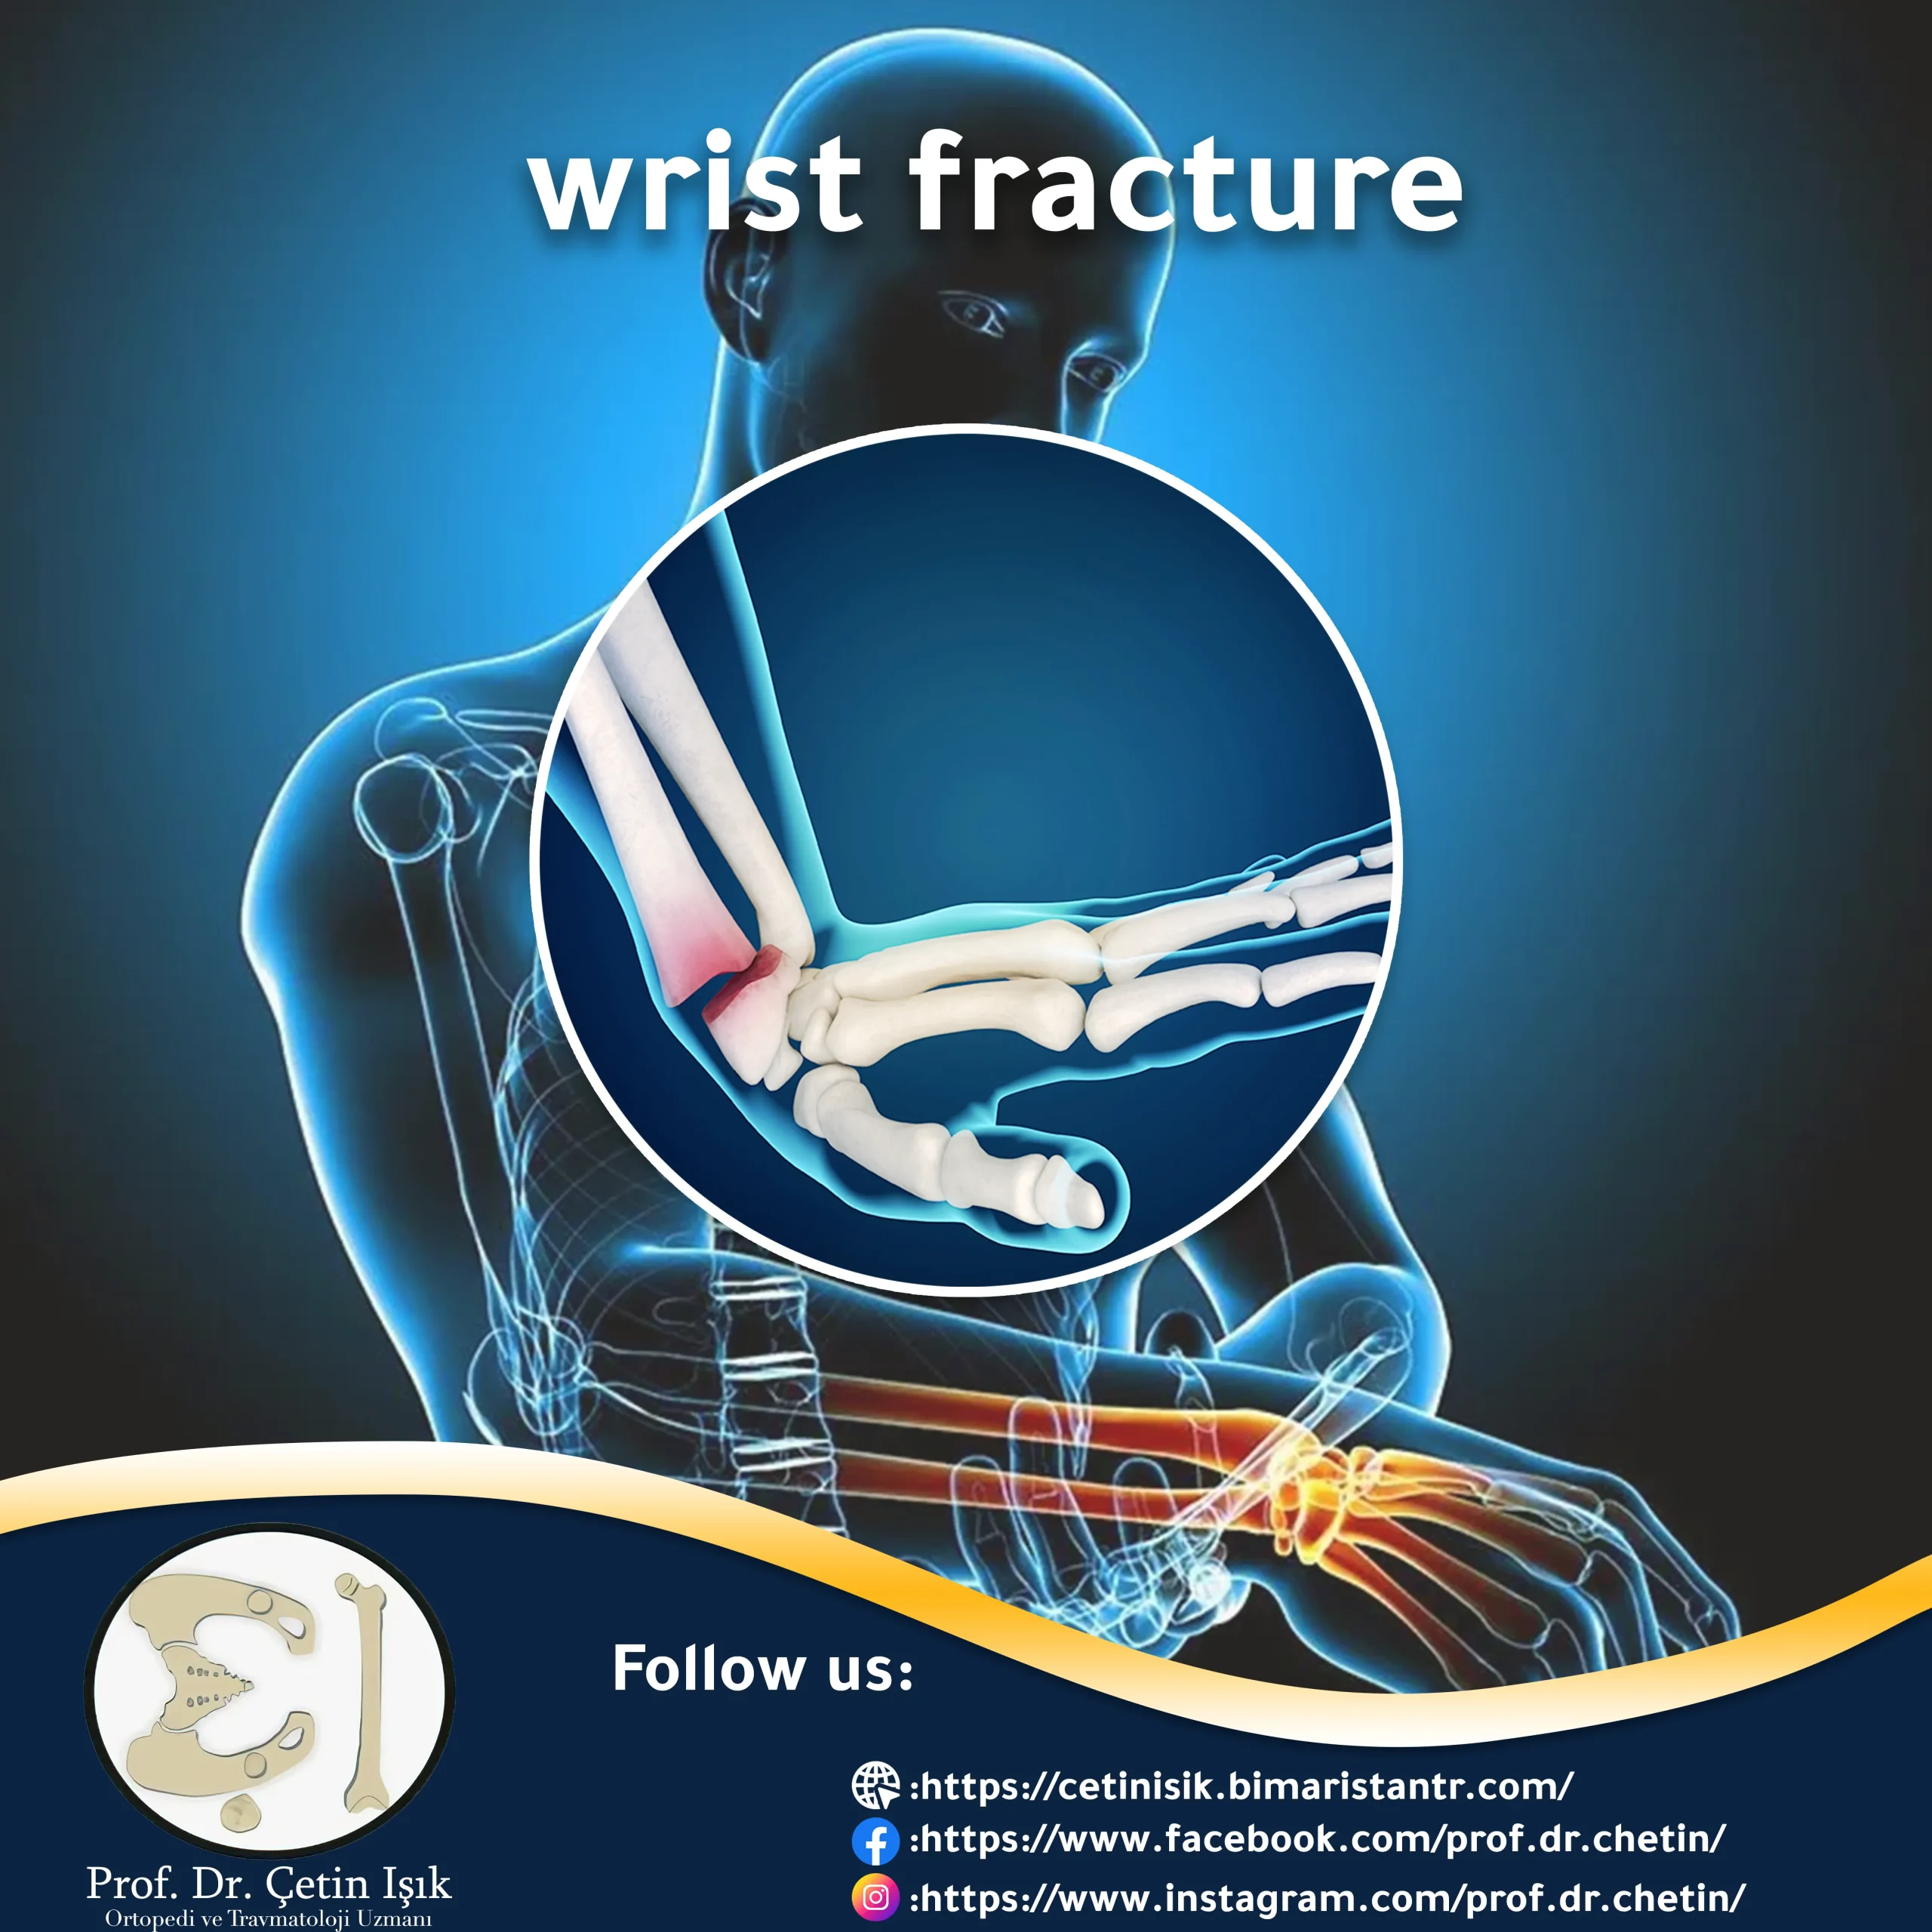 wrist fracture, how to diagnose it, and methods of treatment